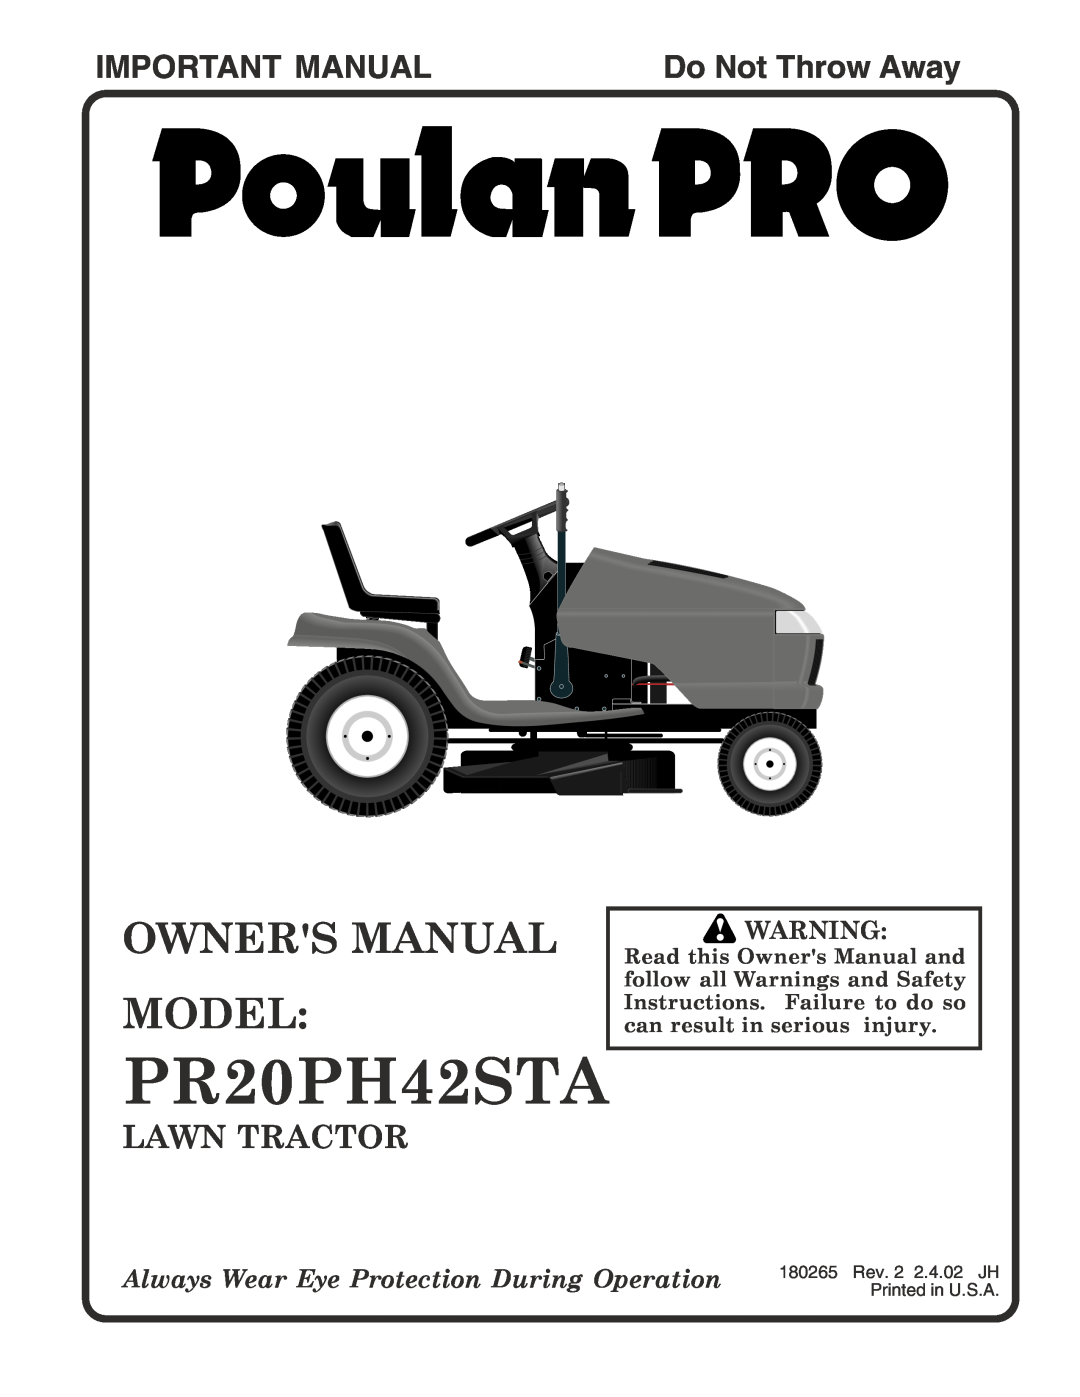 Poulan PR20PH42STA owner manual Owners Manual Model, Important Manual, Do Not Throw Away, Lawn Tractor 